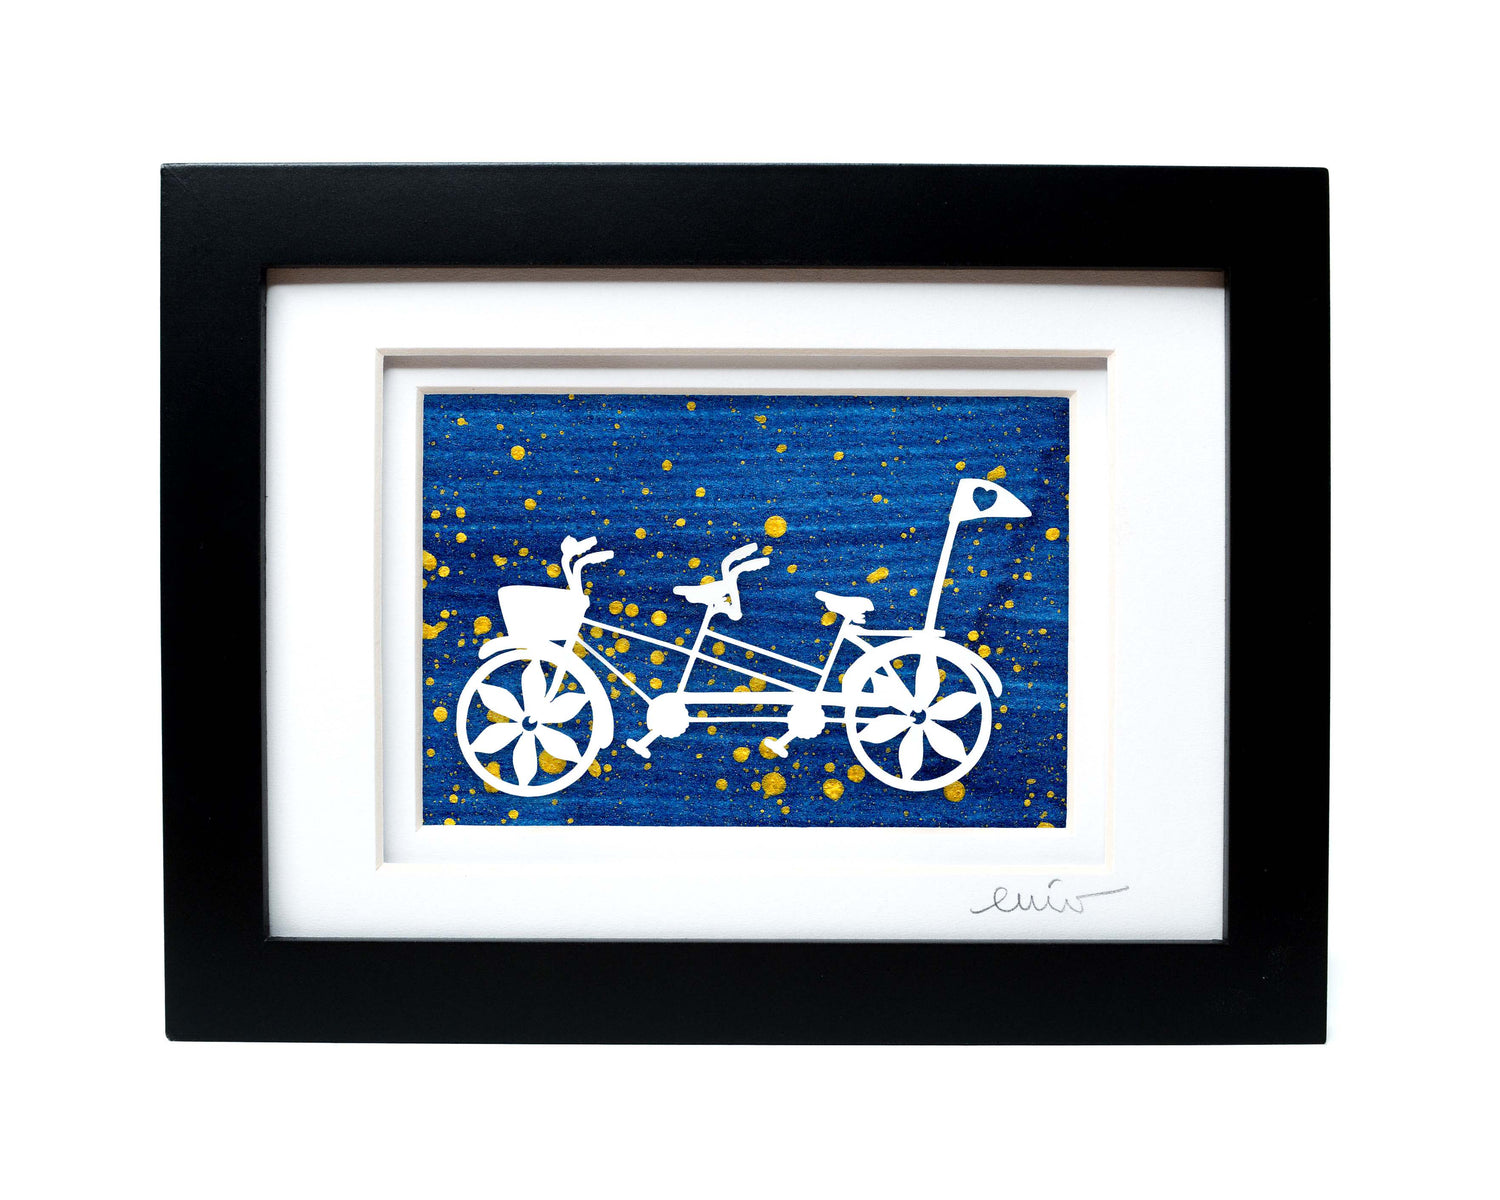 White tandem couples bike with heart flag papercut on hand painted dark blue splattered background.